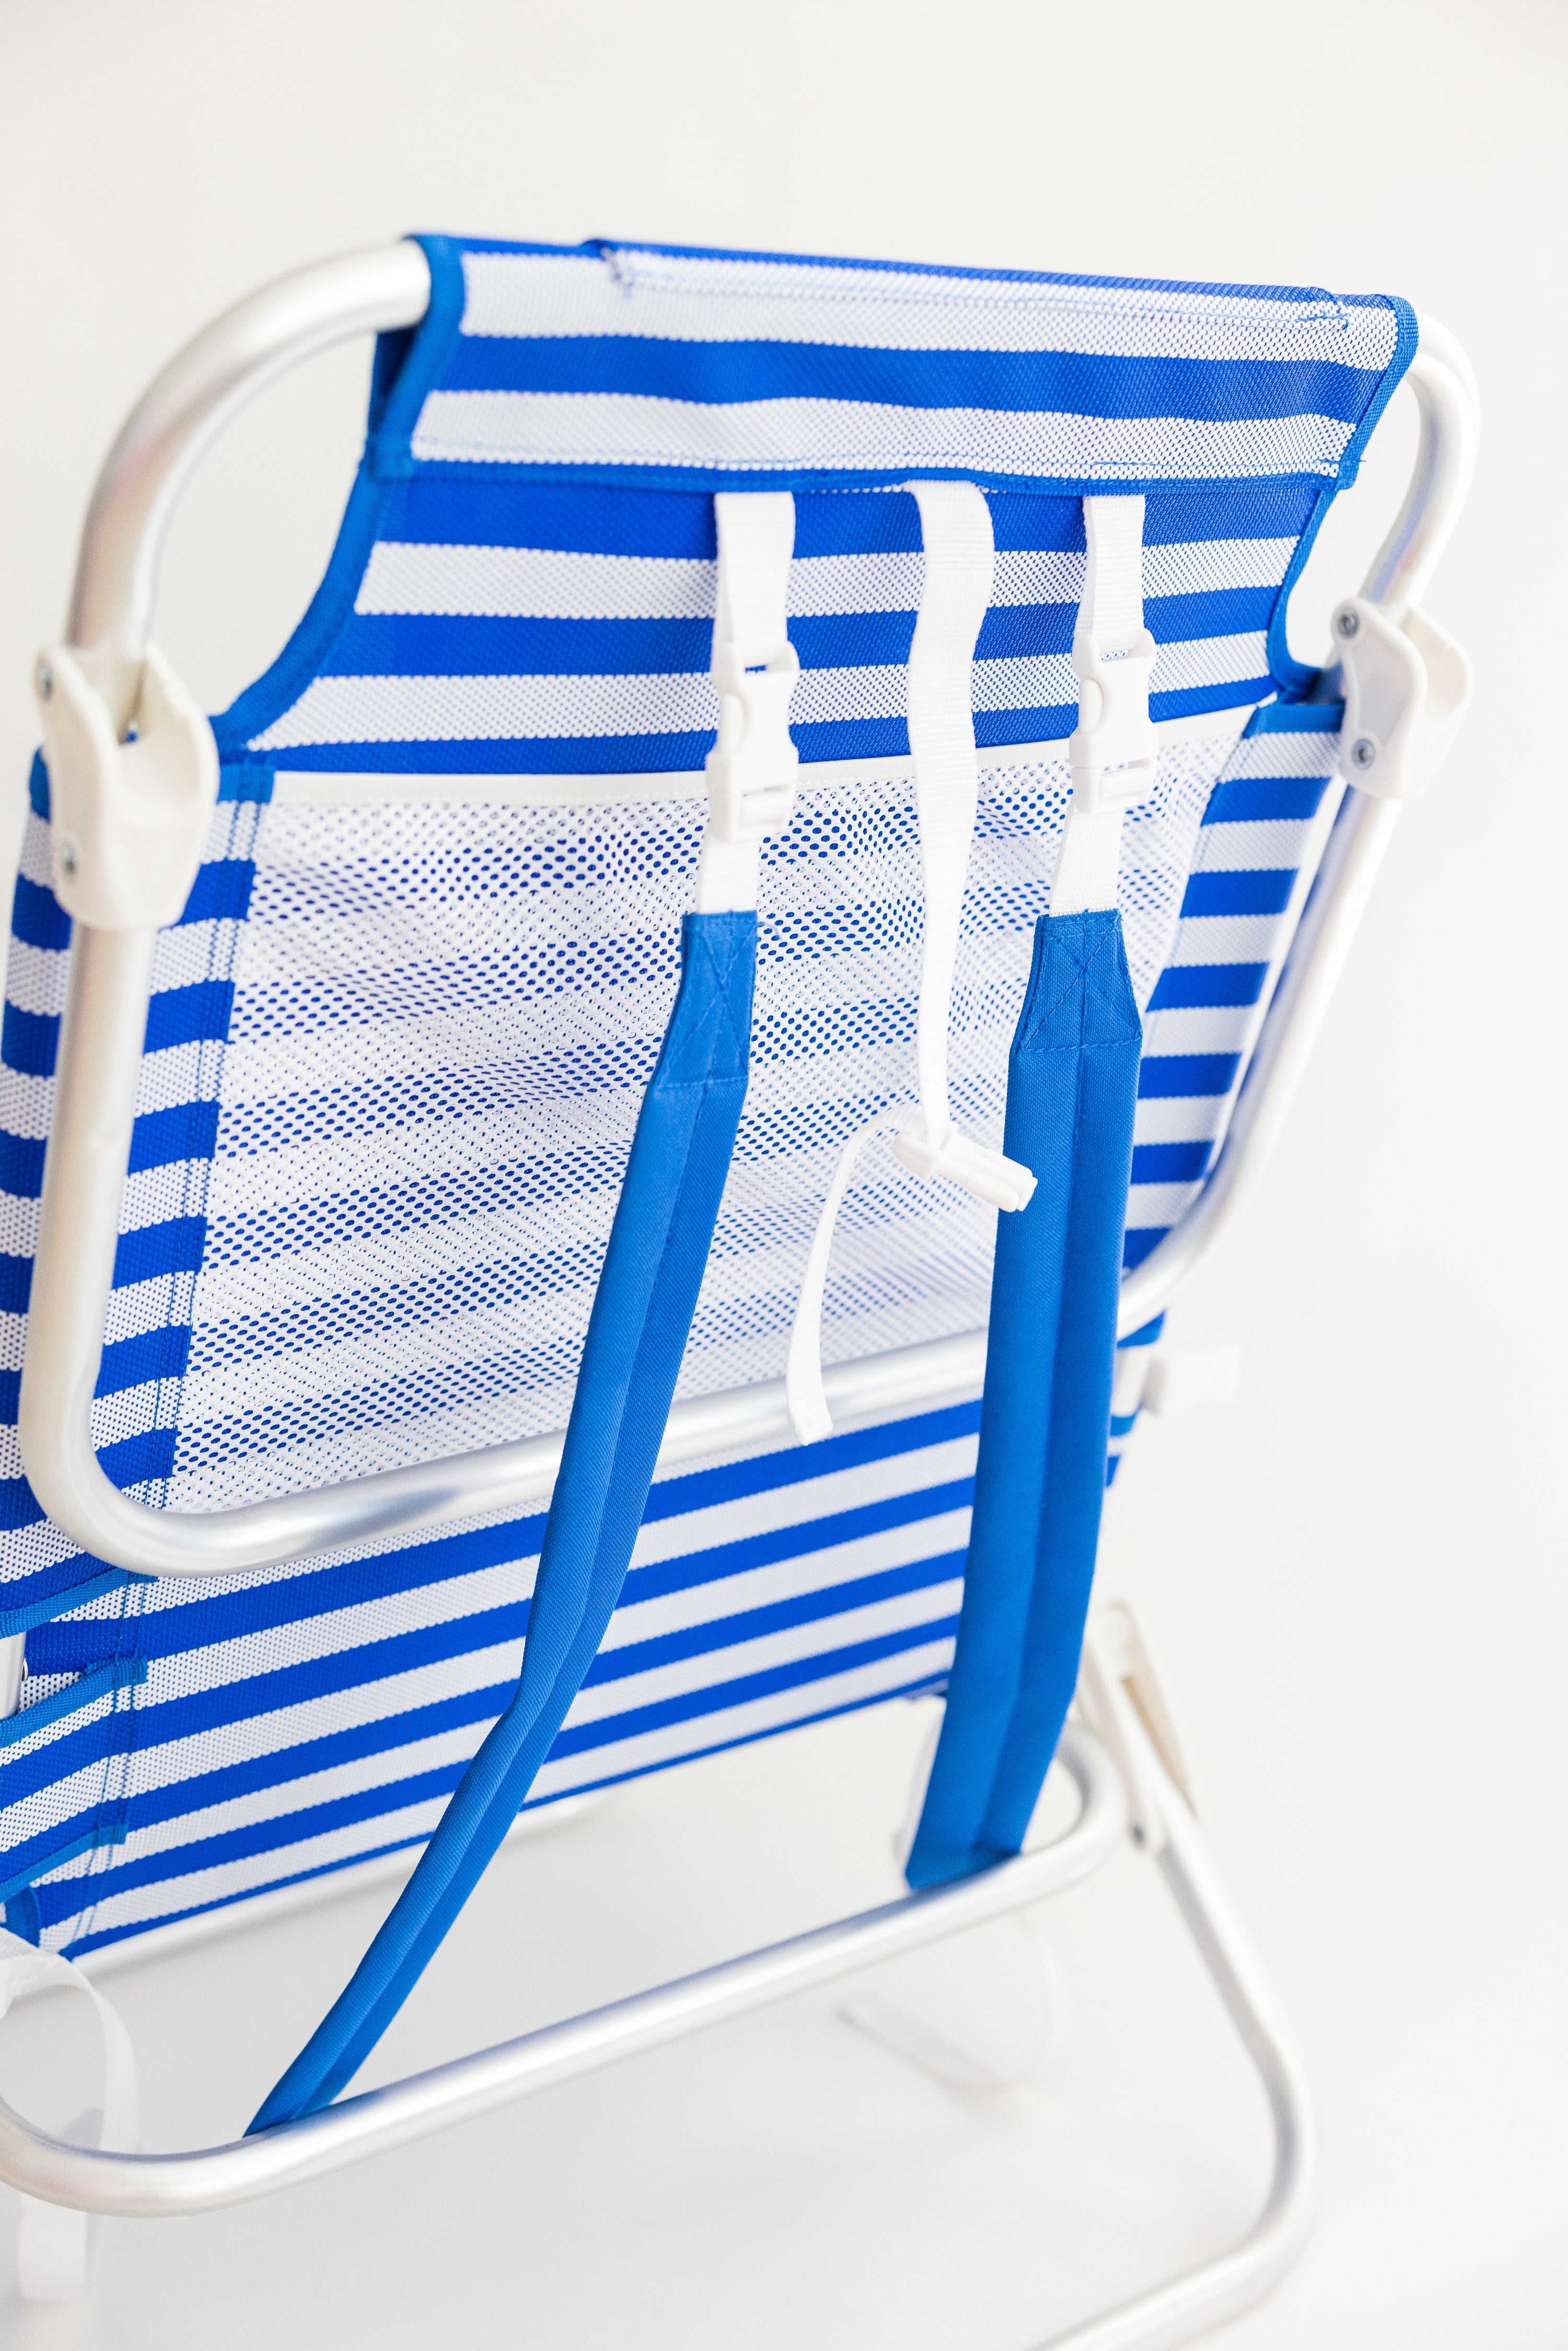 Set of Two (2) Lay Flat Backpack Beach Chairs